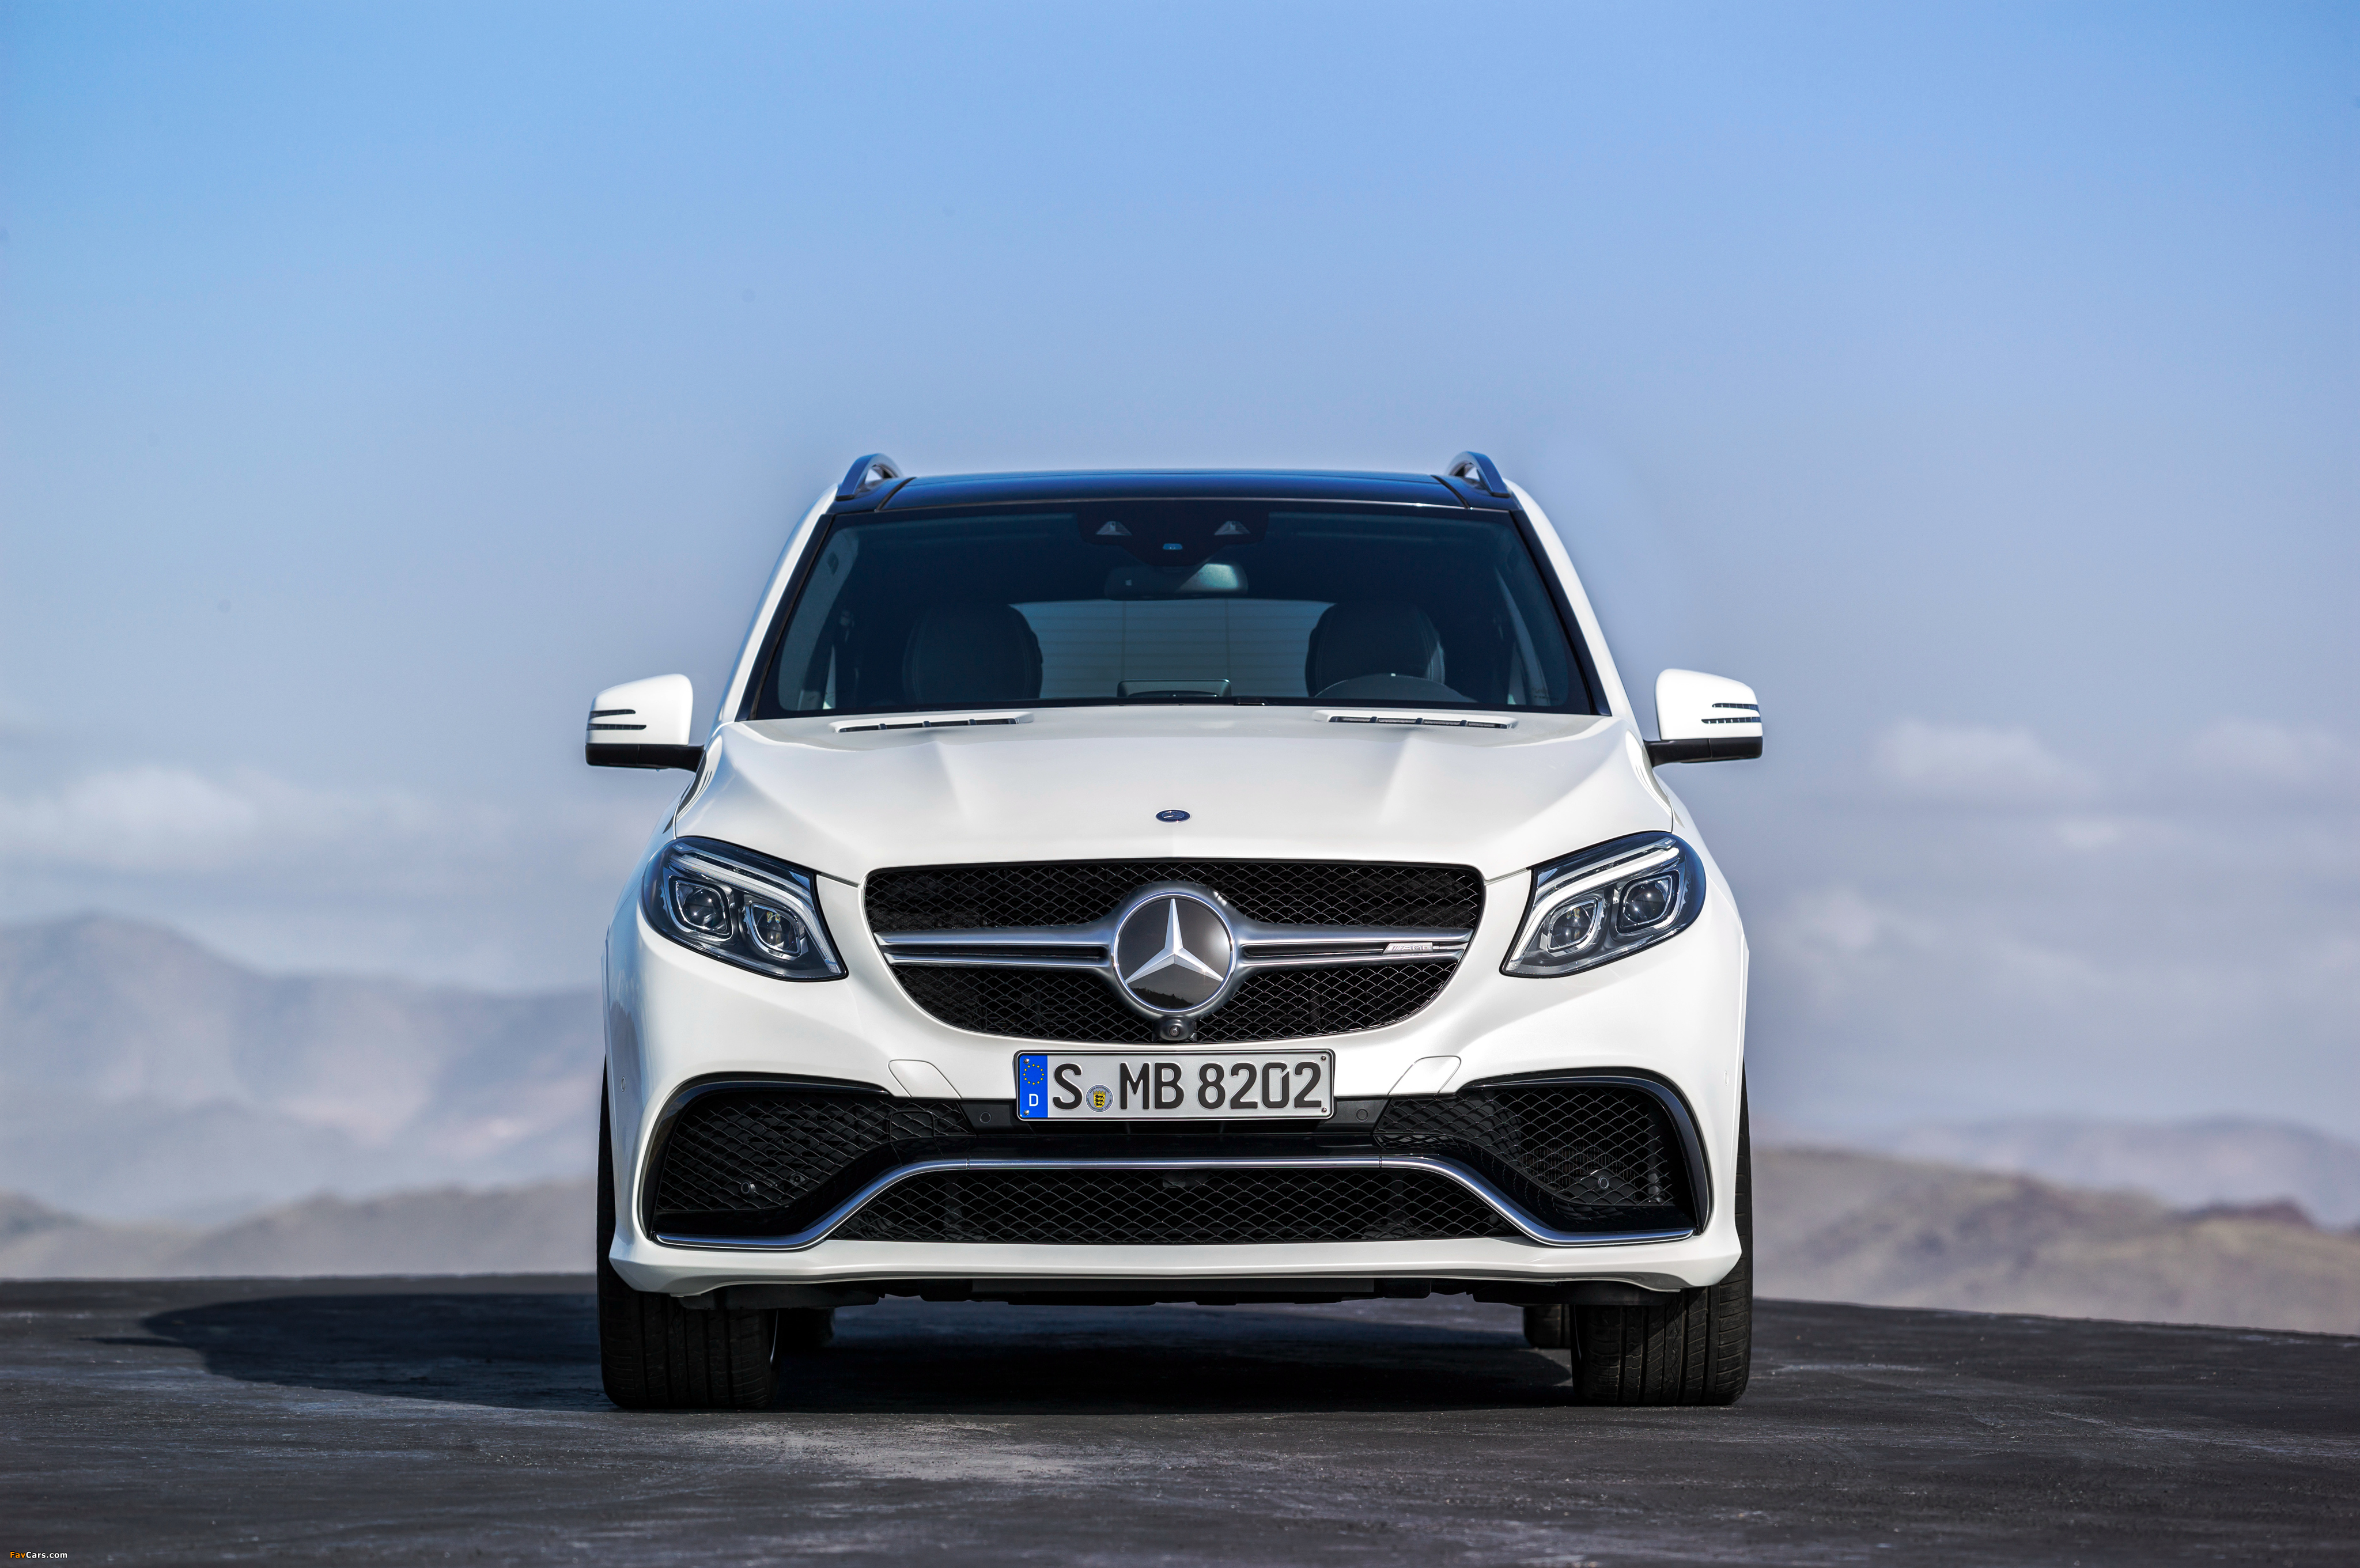 Mercedes-AMG GLE 63 S 4MATIC (W166) 2015 wallpapers (4096 x 2722)